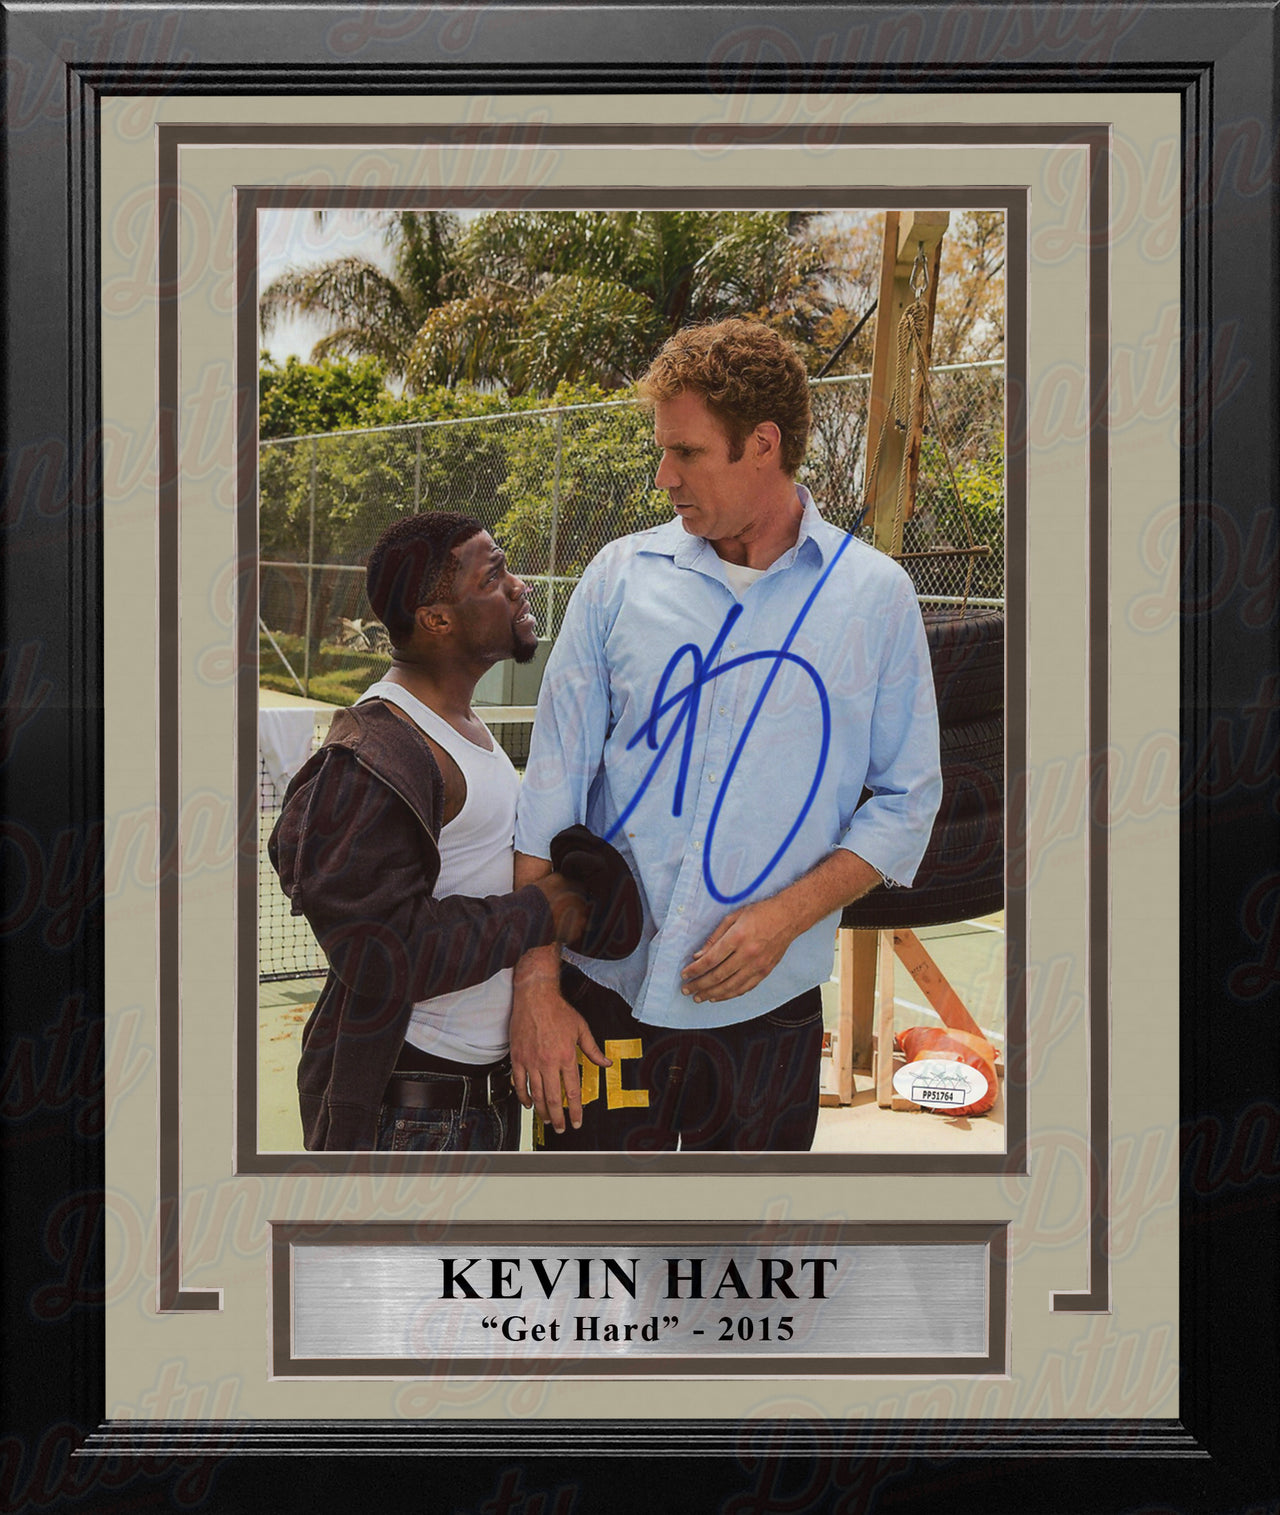 Kevin Hart Autographed Get Hard 8" x 10" Framed Movie Photo - Dynasty Sports & Framing 